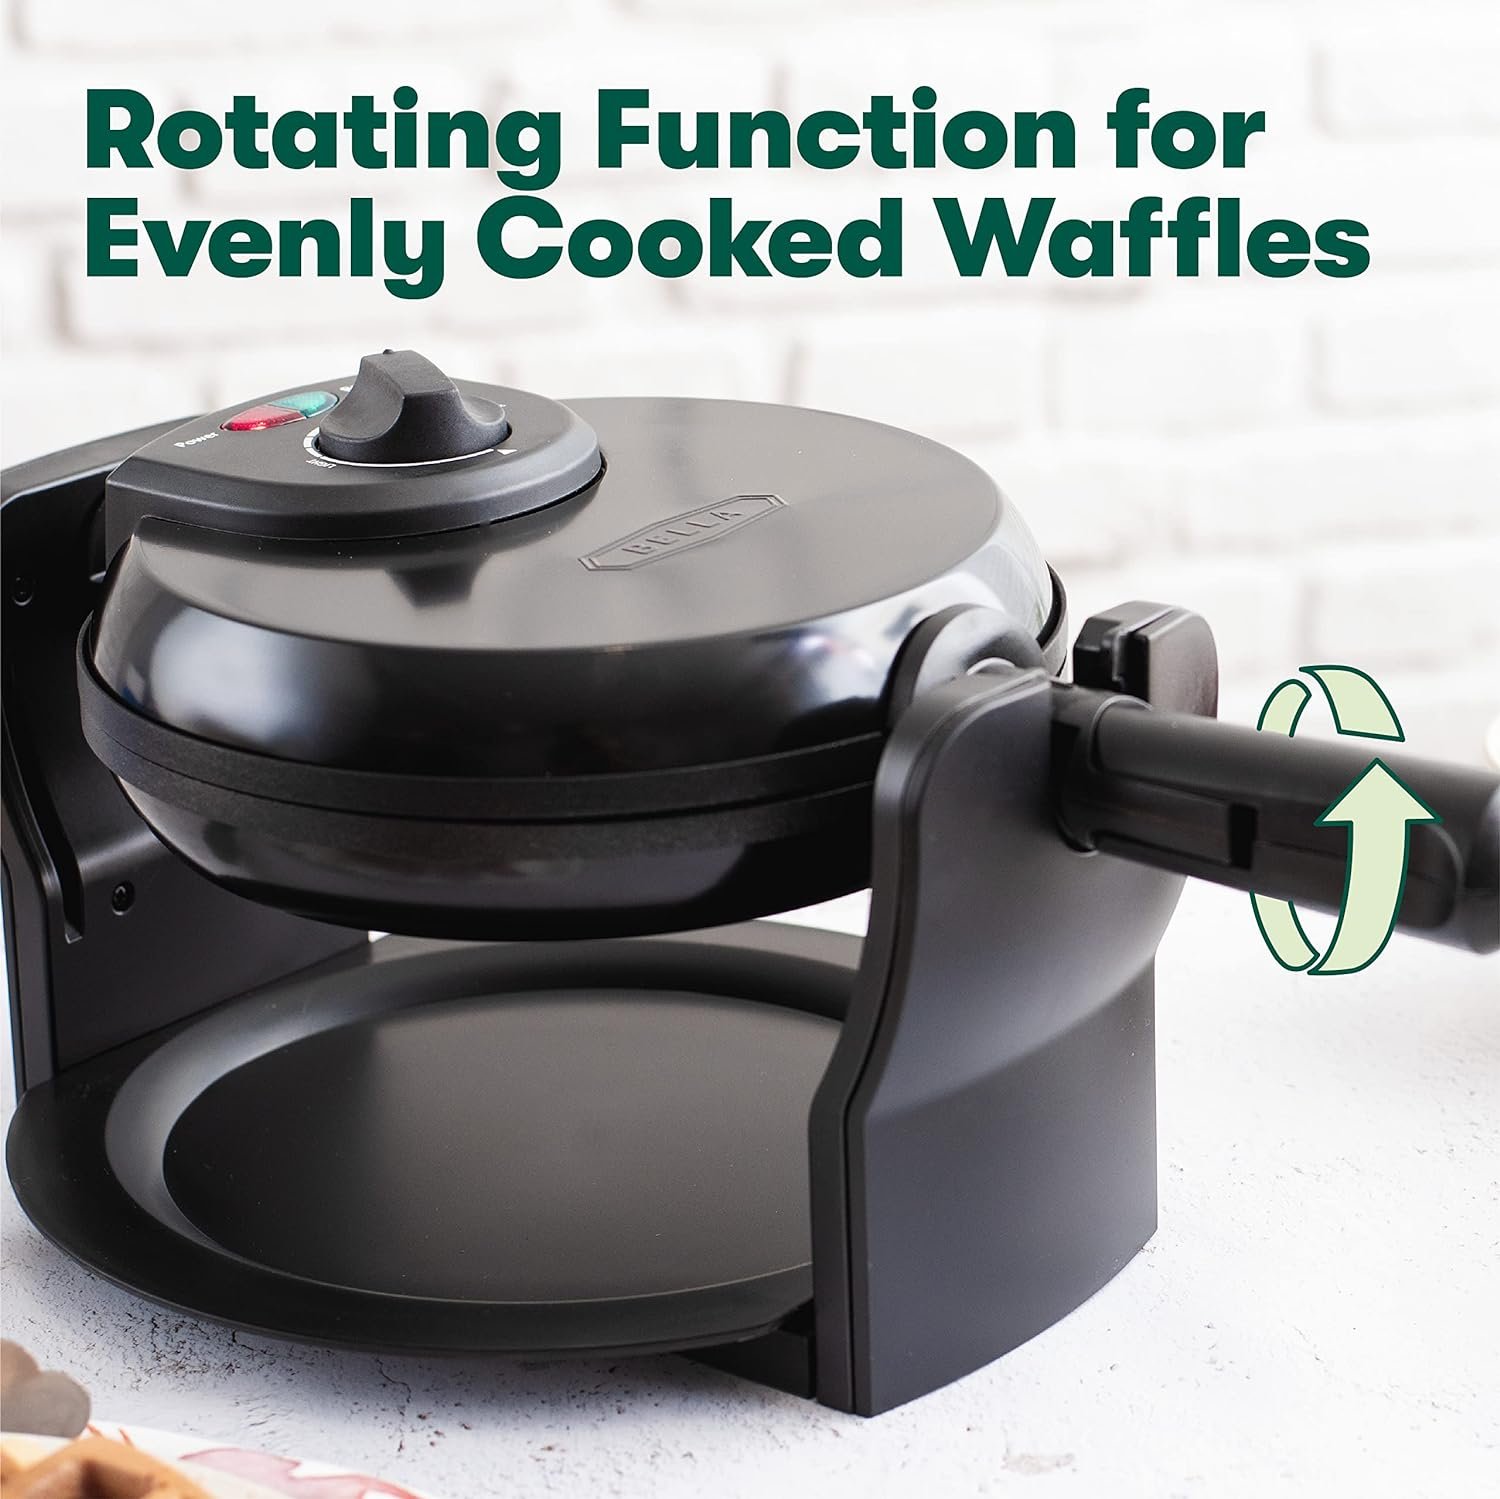 BELLA Classic Rotating Non-Stick Belgian Waffle Maker, Black  Electric Griddle w Warming Tray, Make 8 Pancakes or Eggs At Once, Fry Flip  Serve Warm, 10 x 18, Copper/Black